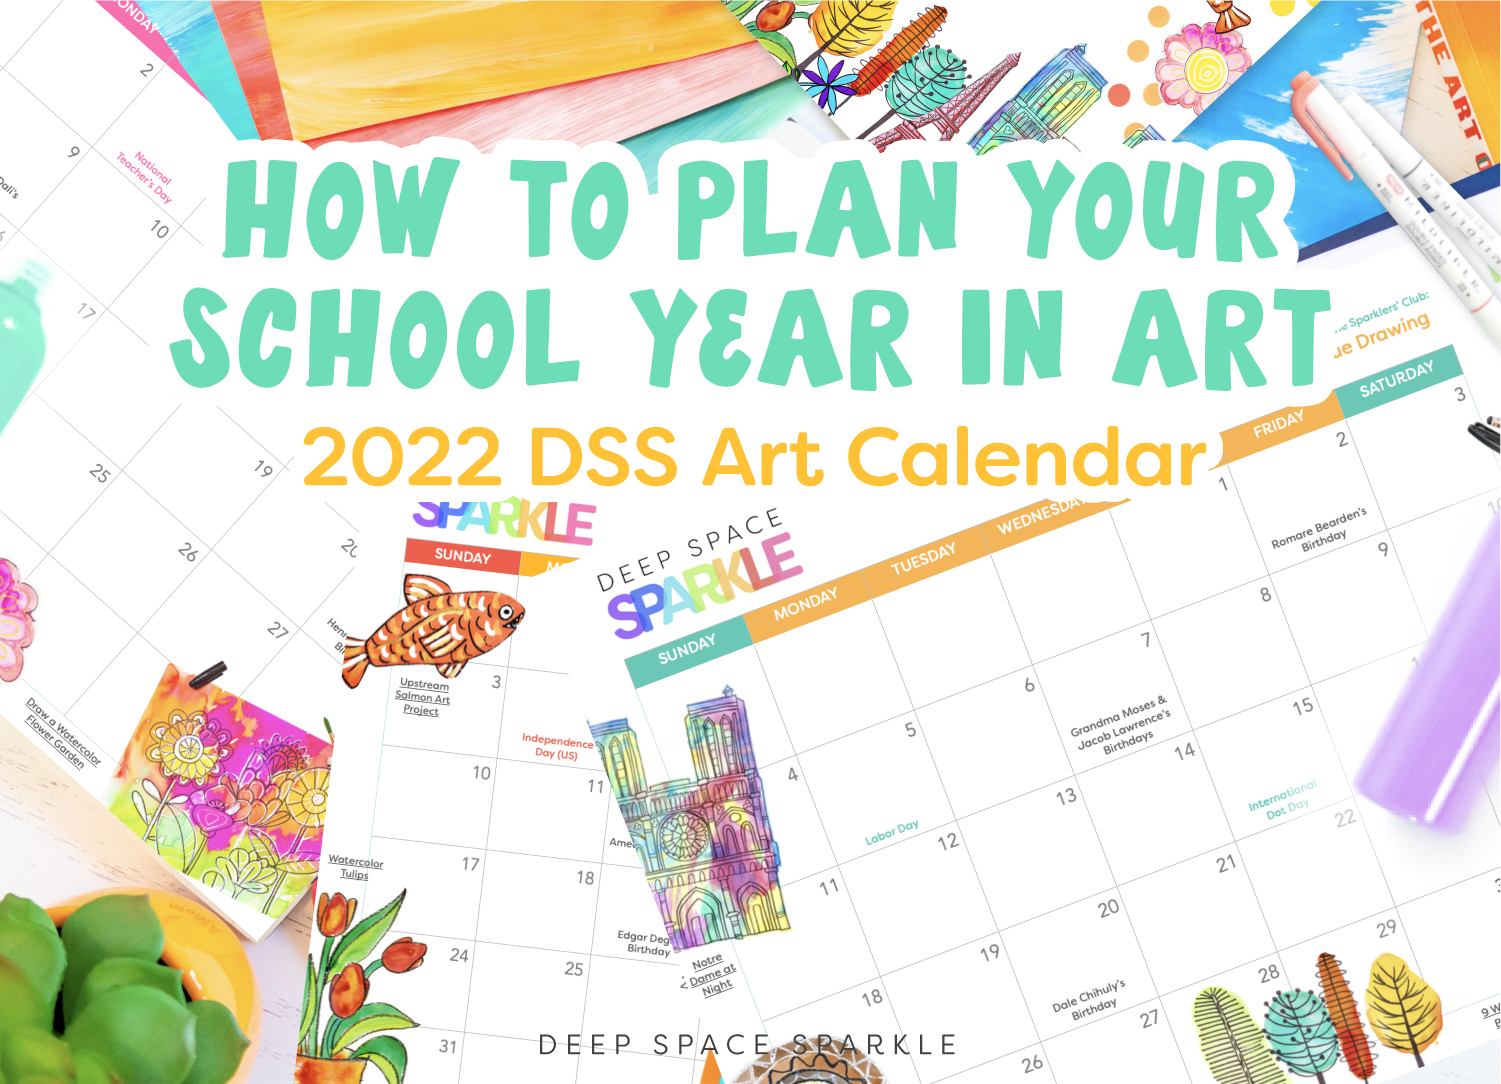 How to Plan Your School Year in Art | Resource for art teachers